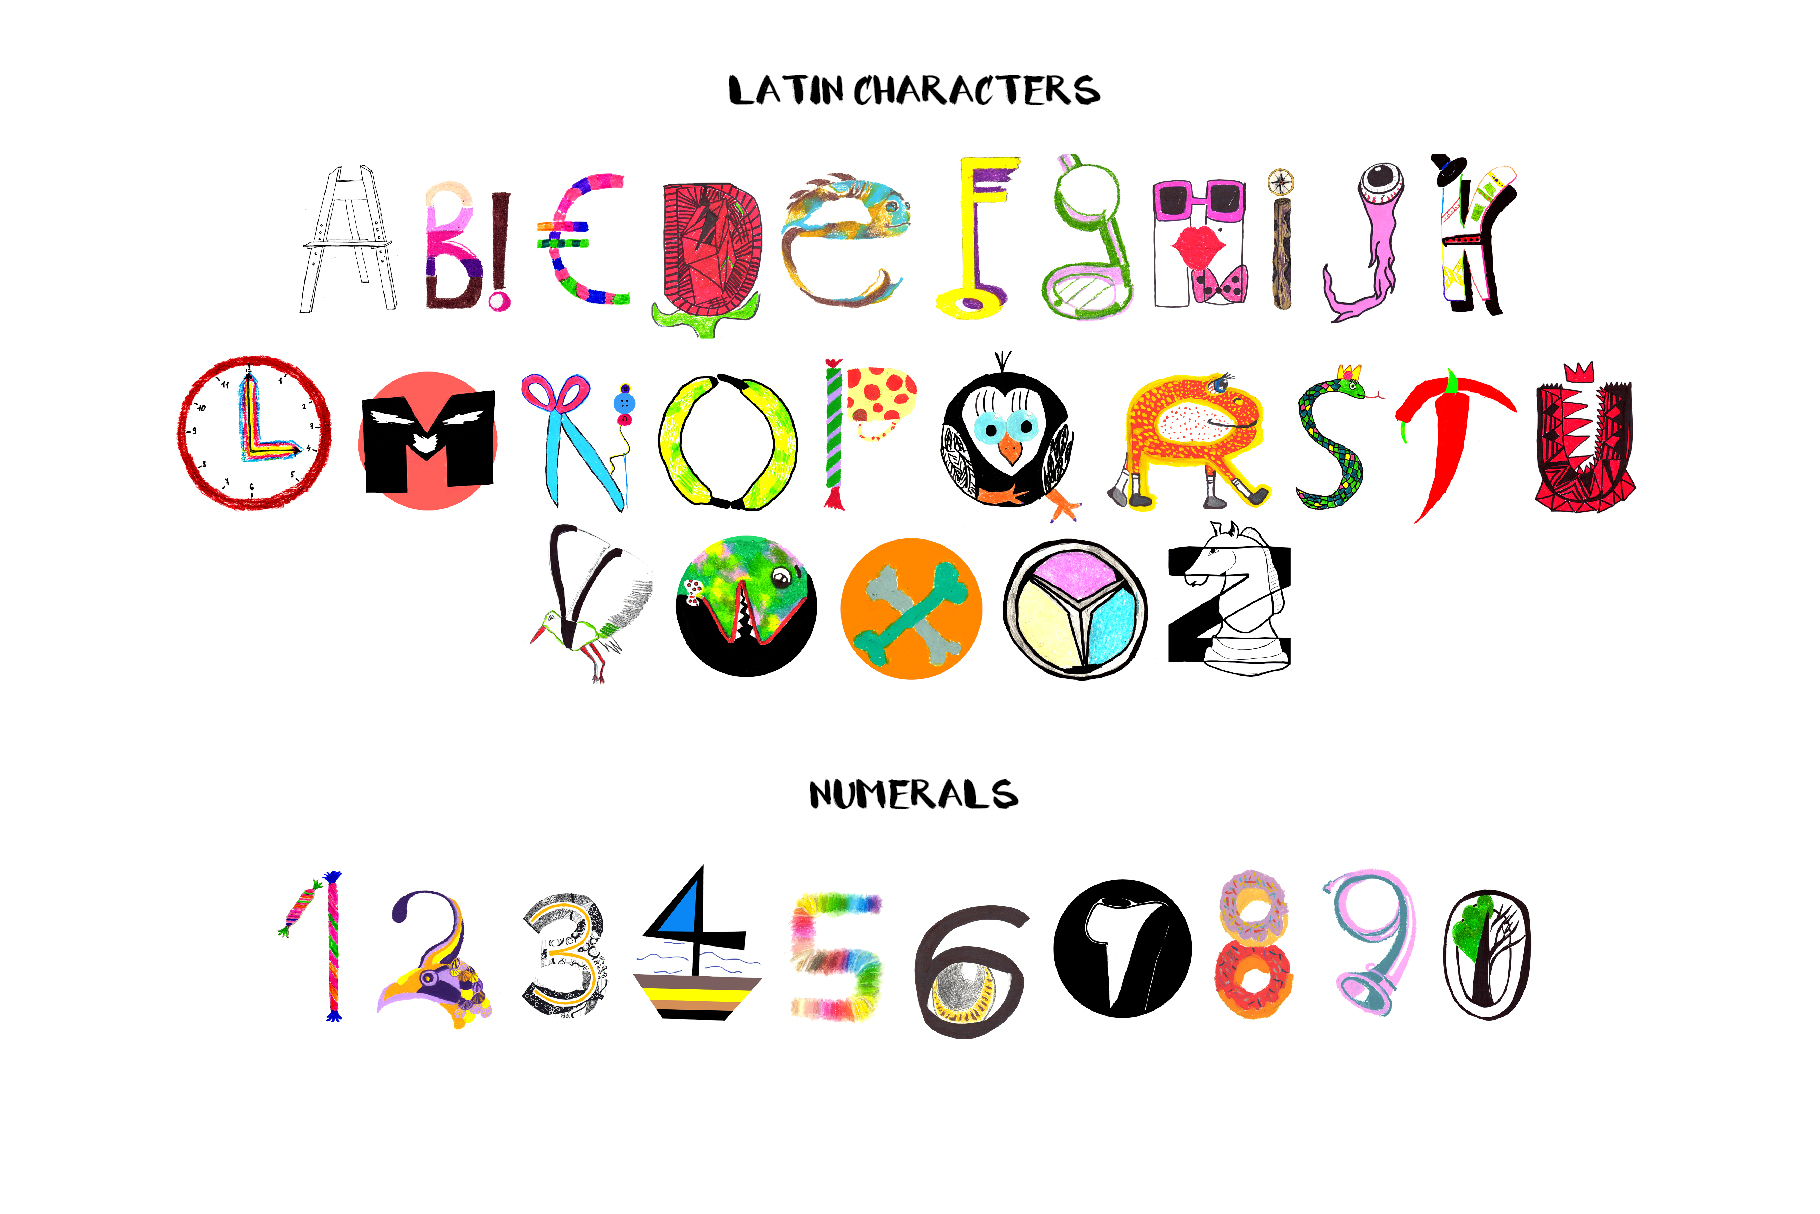 Latin colorful letters with numerals.